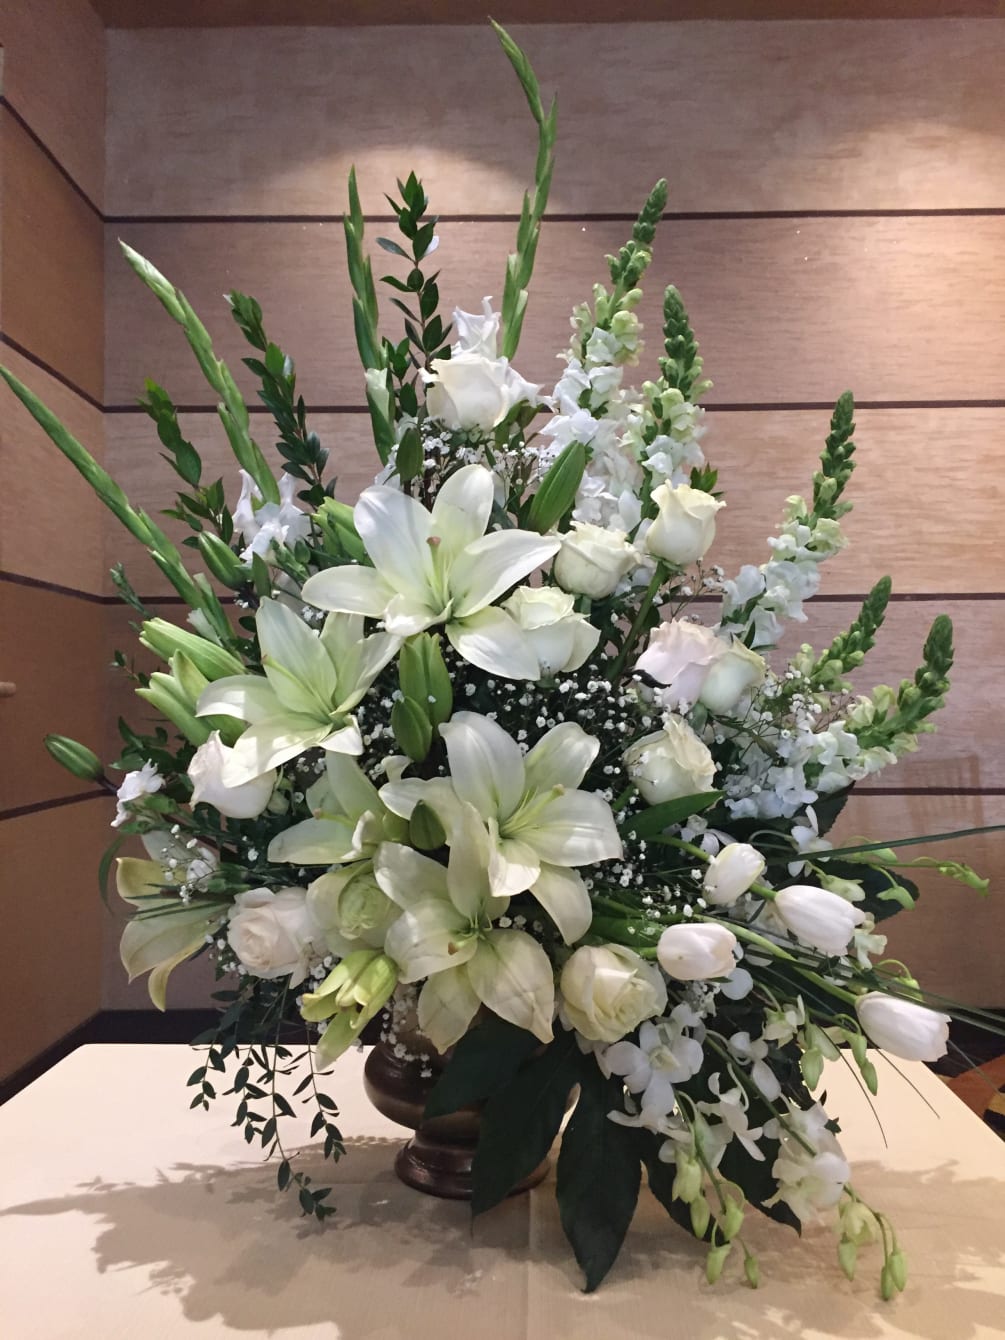 As hopeful as the bright horizon ahead, this glorious white bouquet of